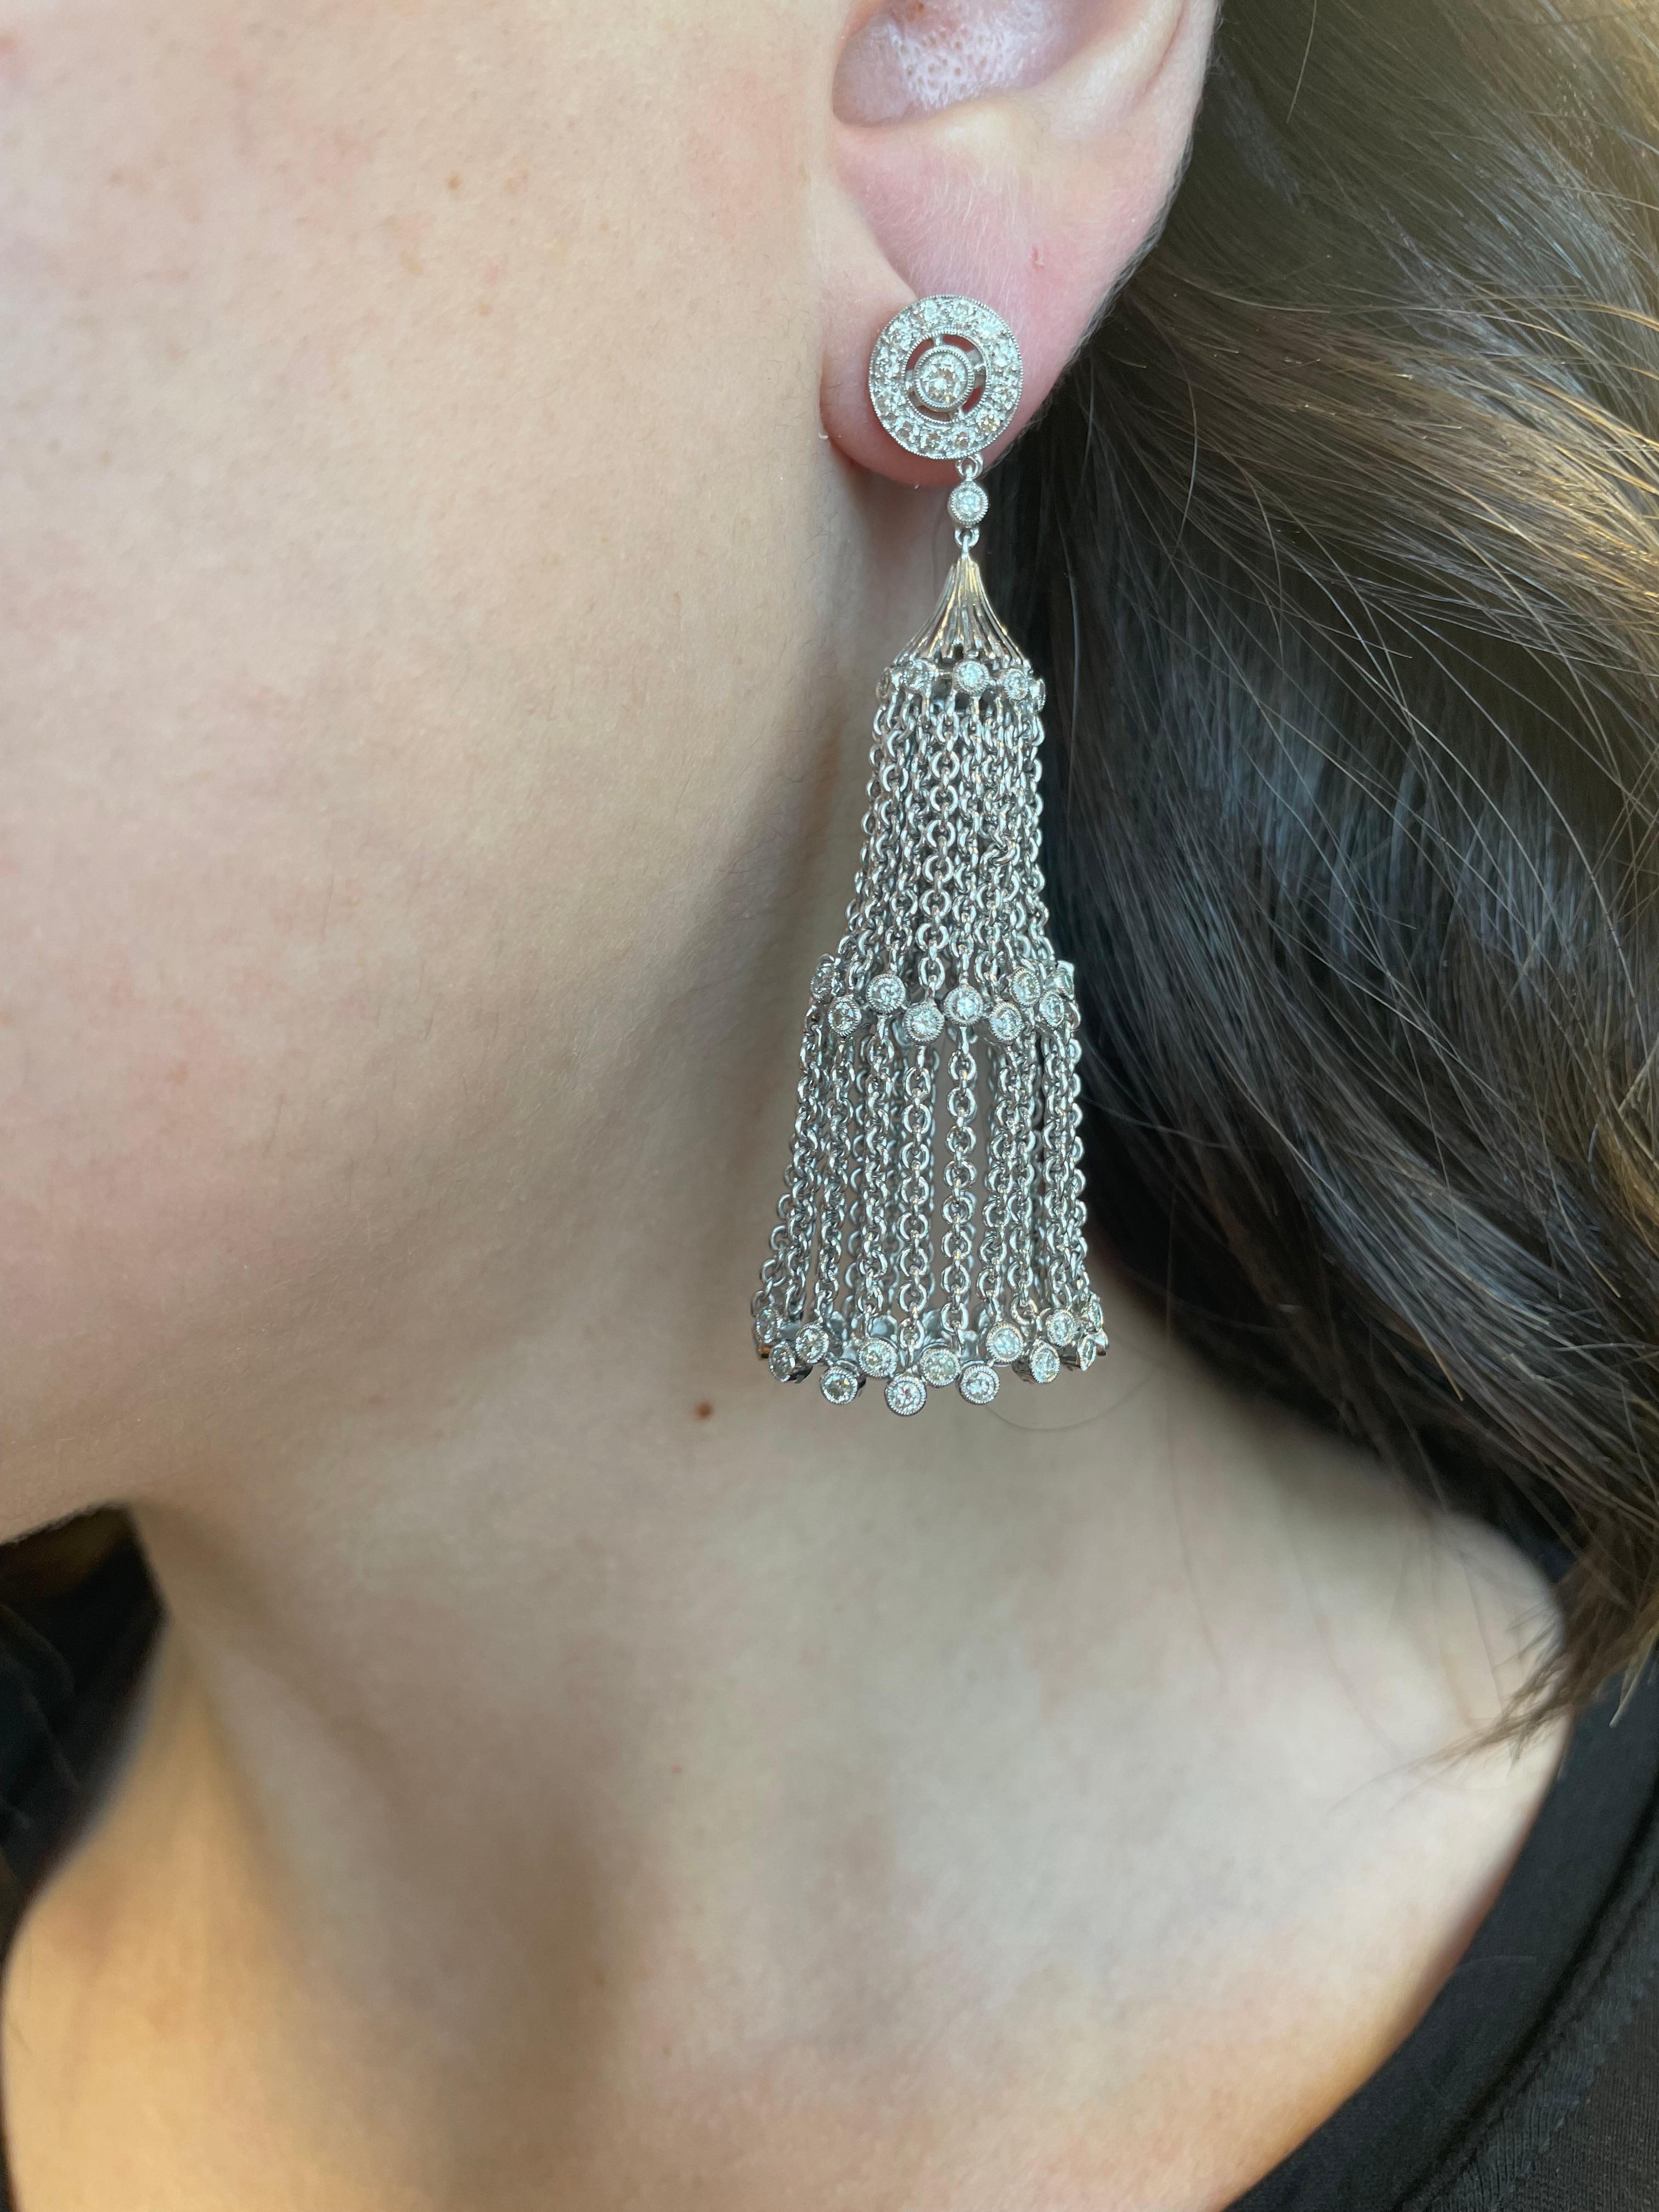 Lovely dangling bezel set diamond chandelier earrings.
2.20 carats of round cut diamonds, approximately H/I color and SI clarity. Bezel set, 18-karat white gold.
Accommodated with an up to date appraisal by a GIA G.G. upon request. please contact us